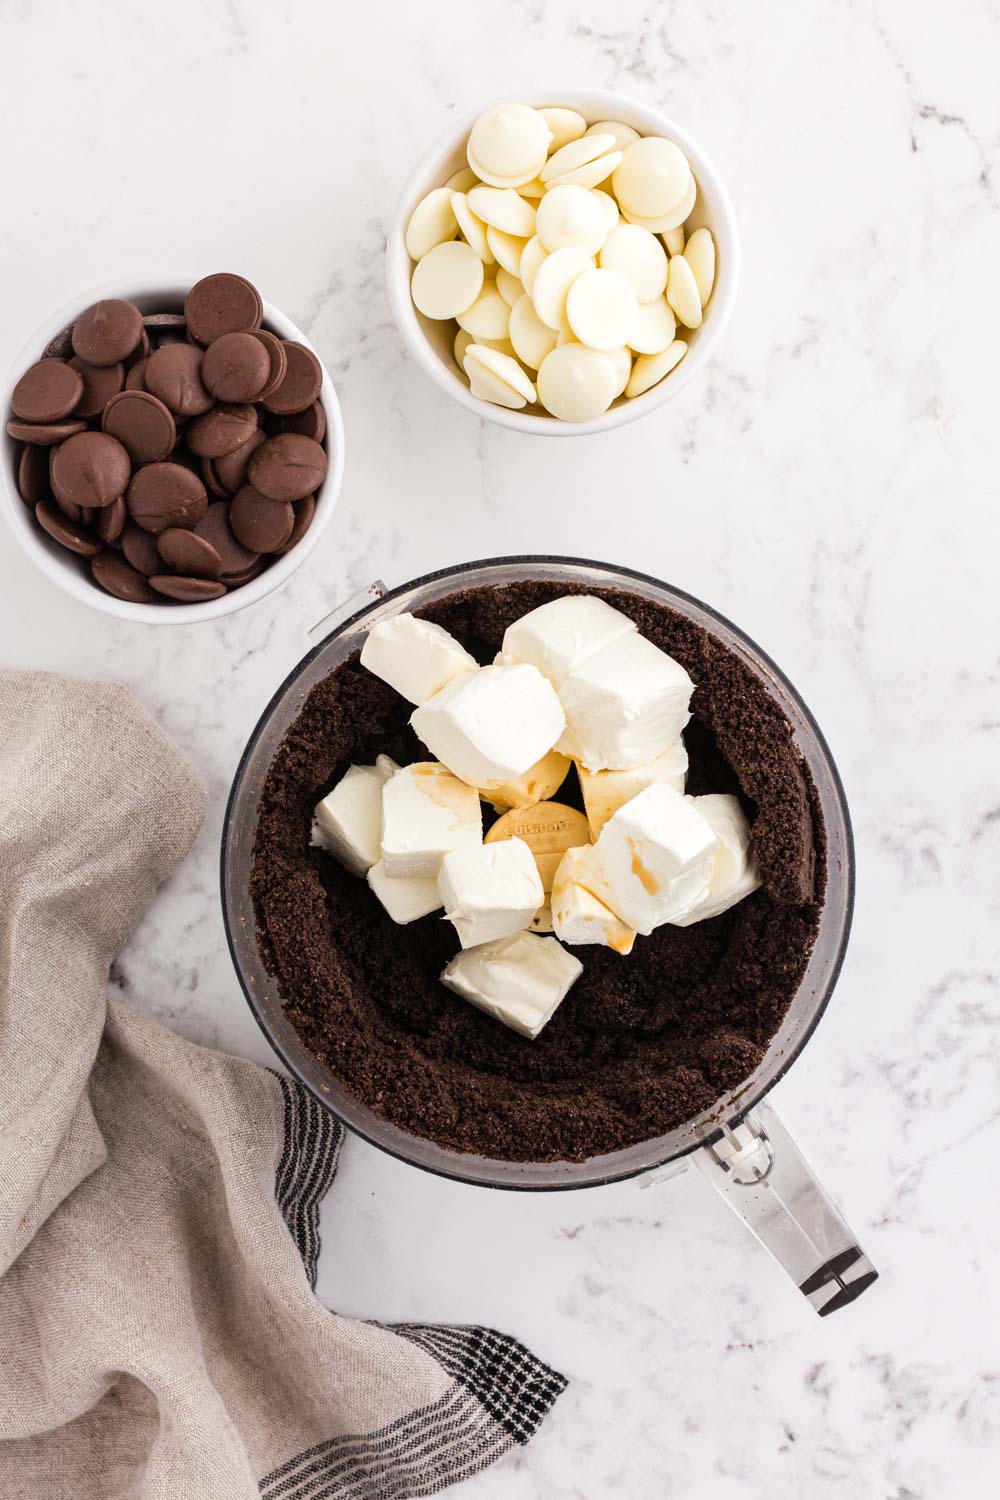 Cream cheese and vanilla extract added to crushed Oreo cookies in food processor, bowl of dark chocolate melting wafers, bowl of white chocolate melting wafers, beige linen, on a white marble surface